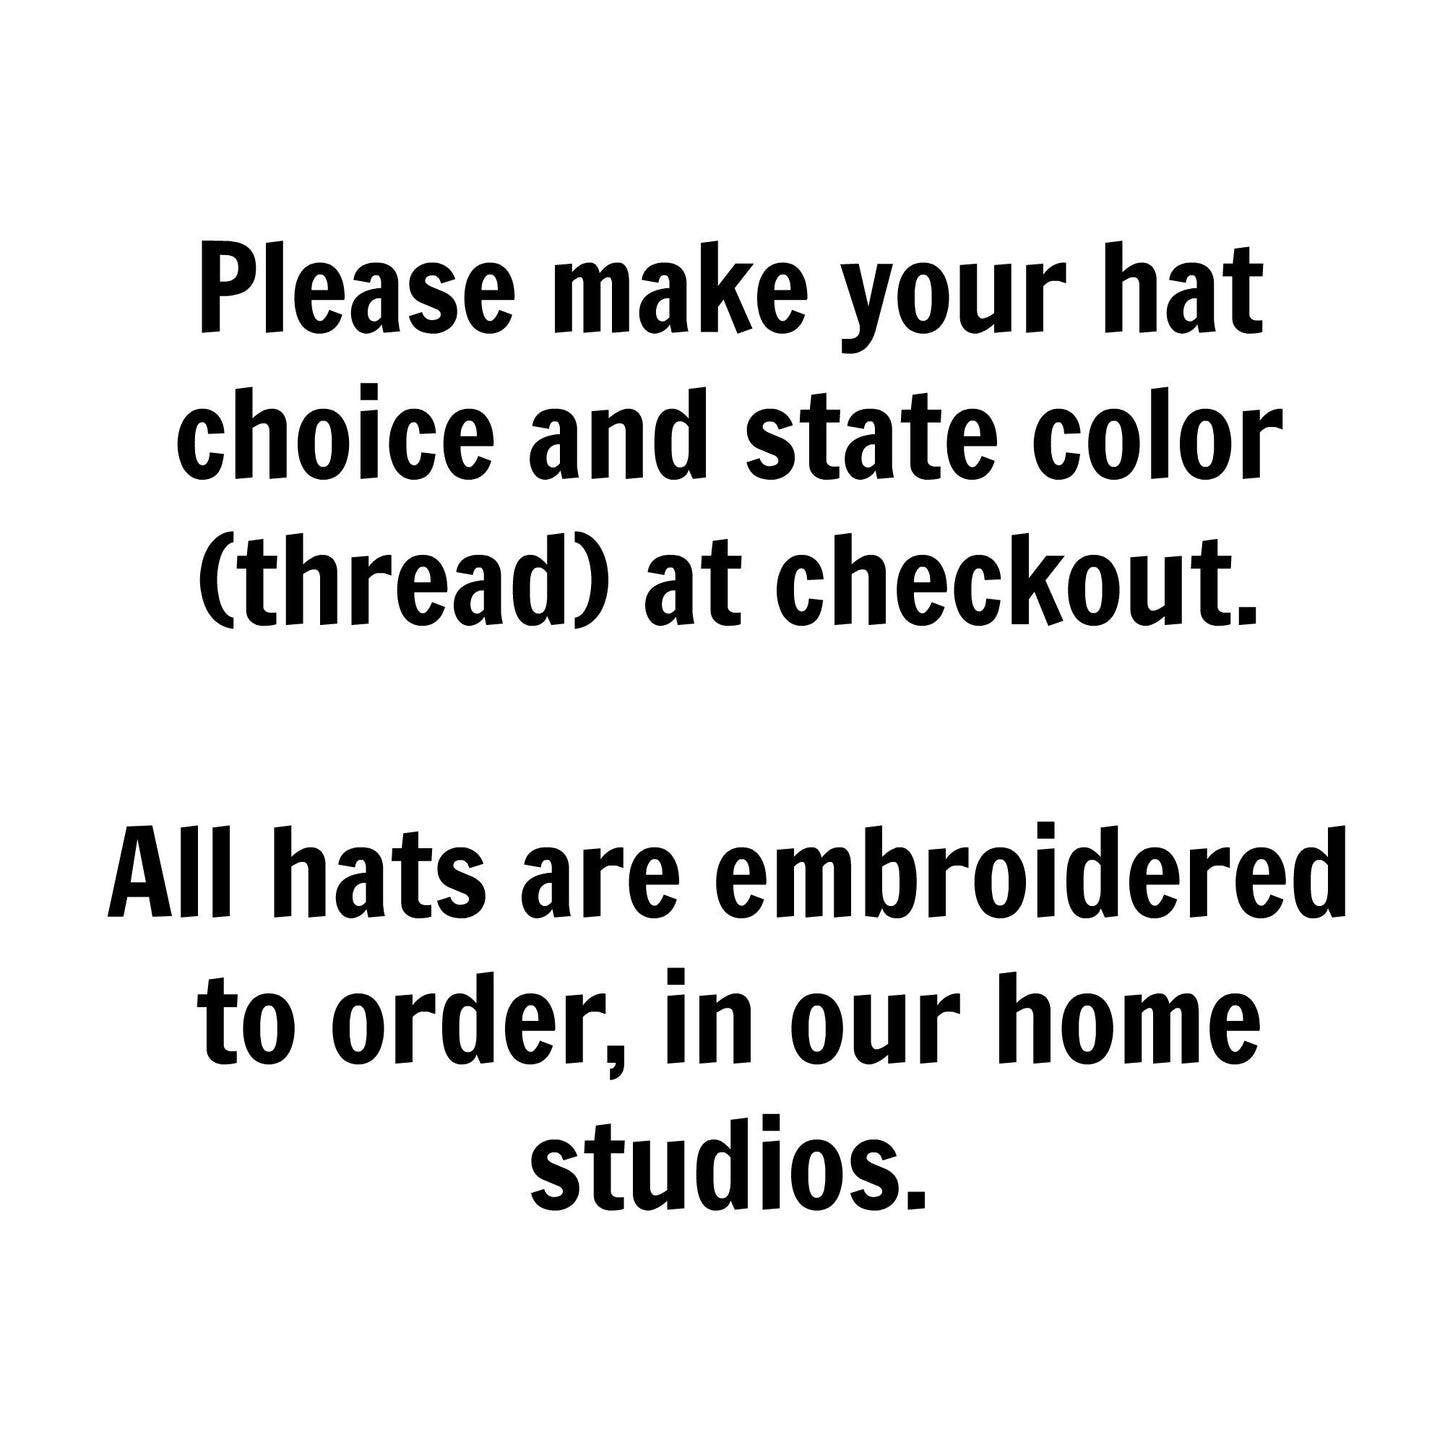 South Carolina Hat - Classic Dad Hat - Many Color Combinations